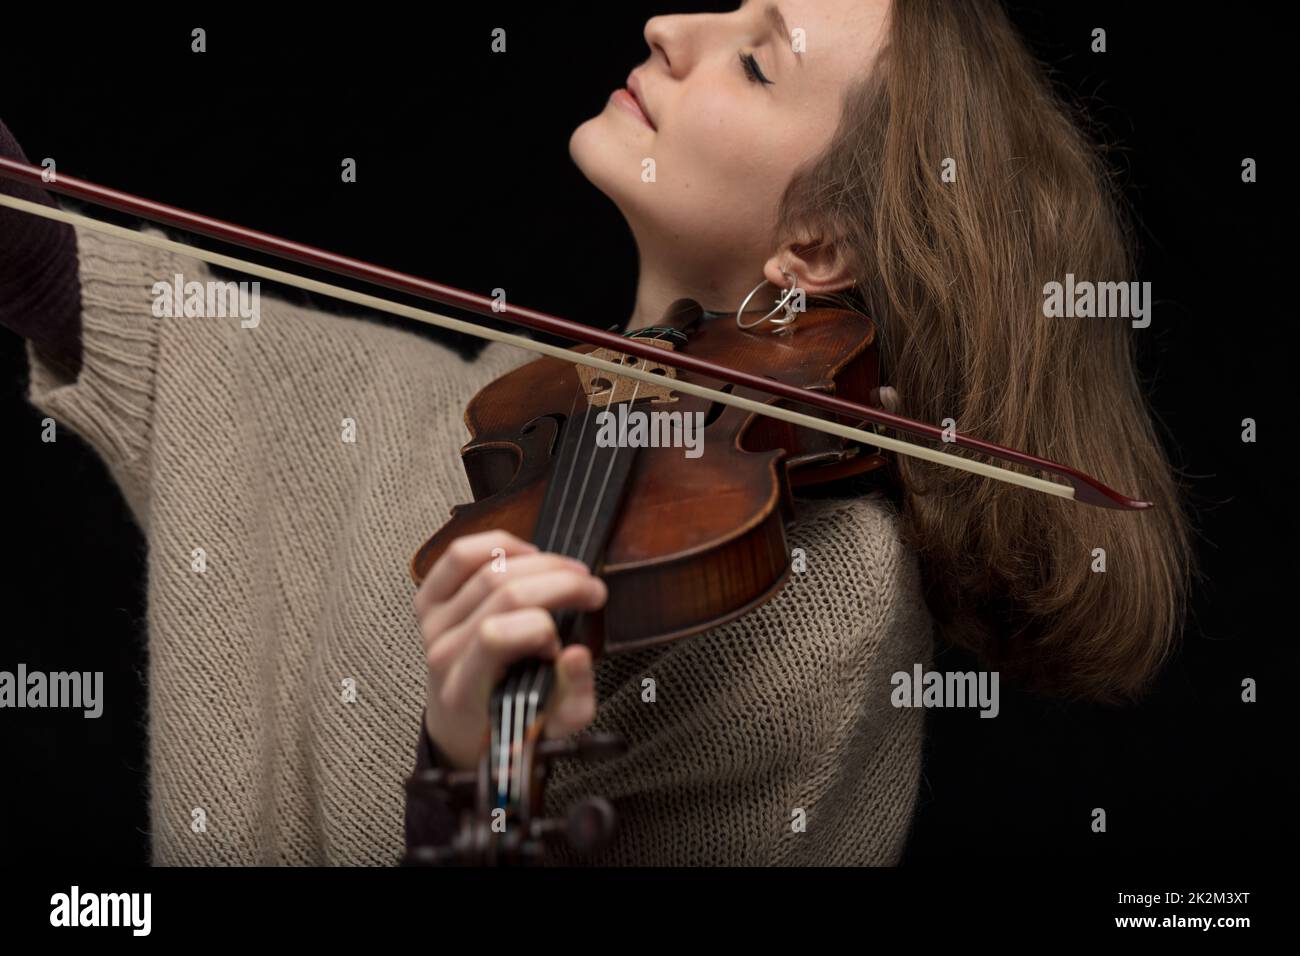 Passionate female violinist playing baroque guitar Stock Photo